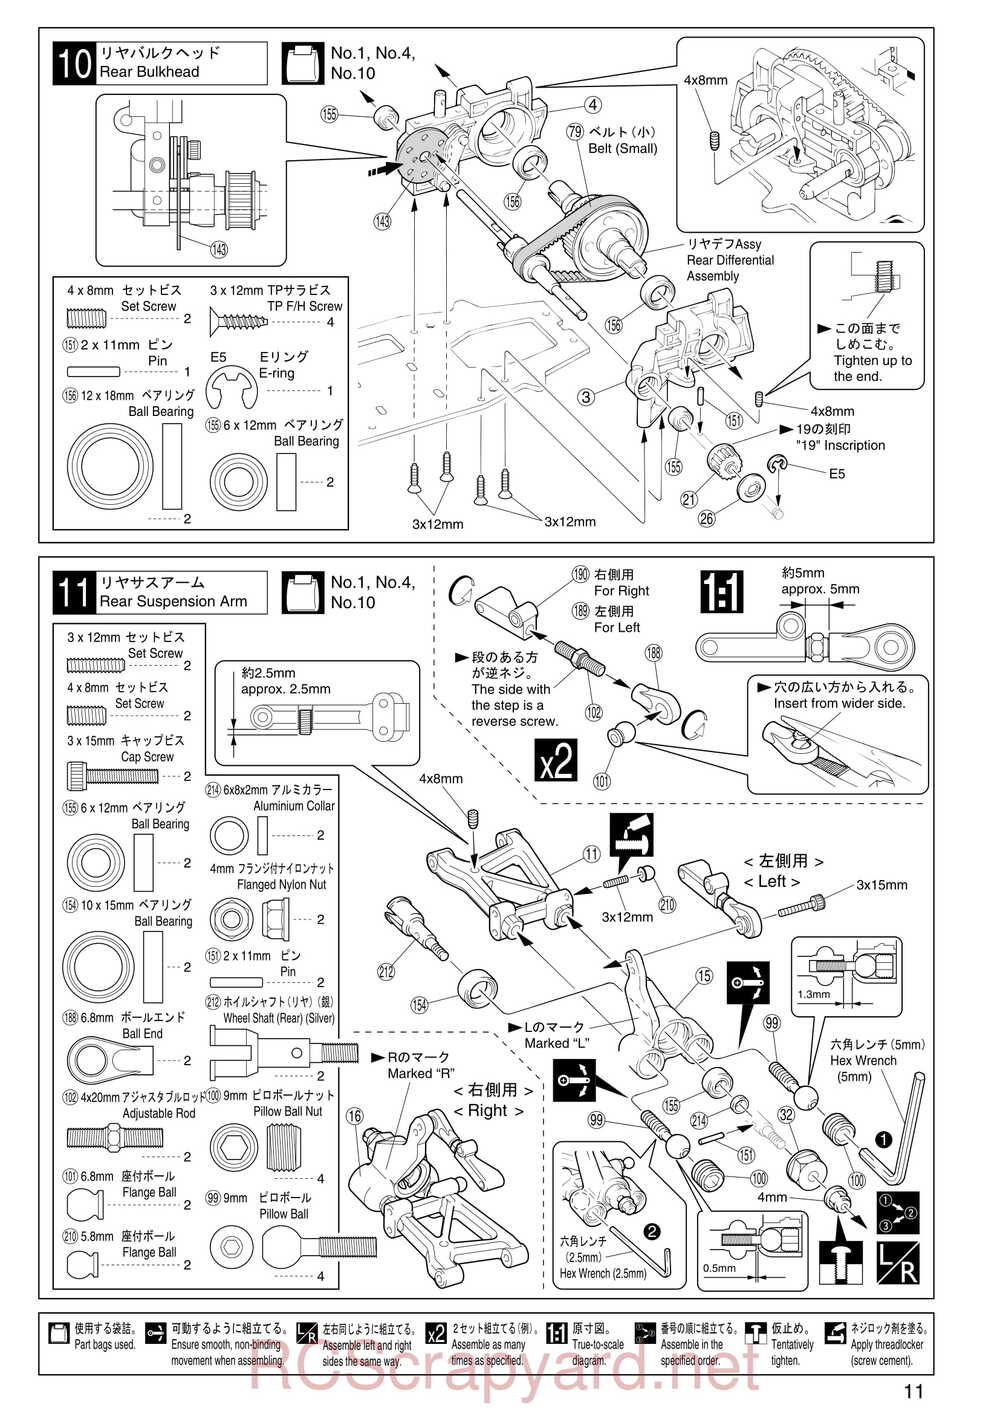 Kyosho - 31102 - V-One RR - Manual - Page 11